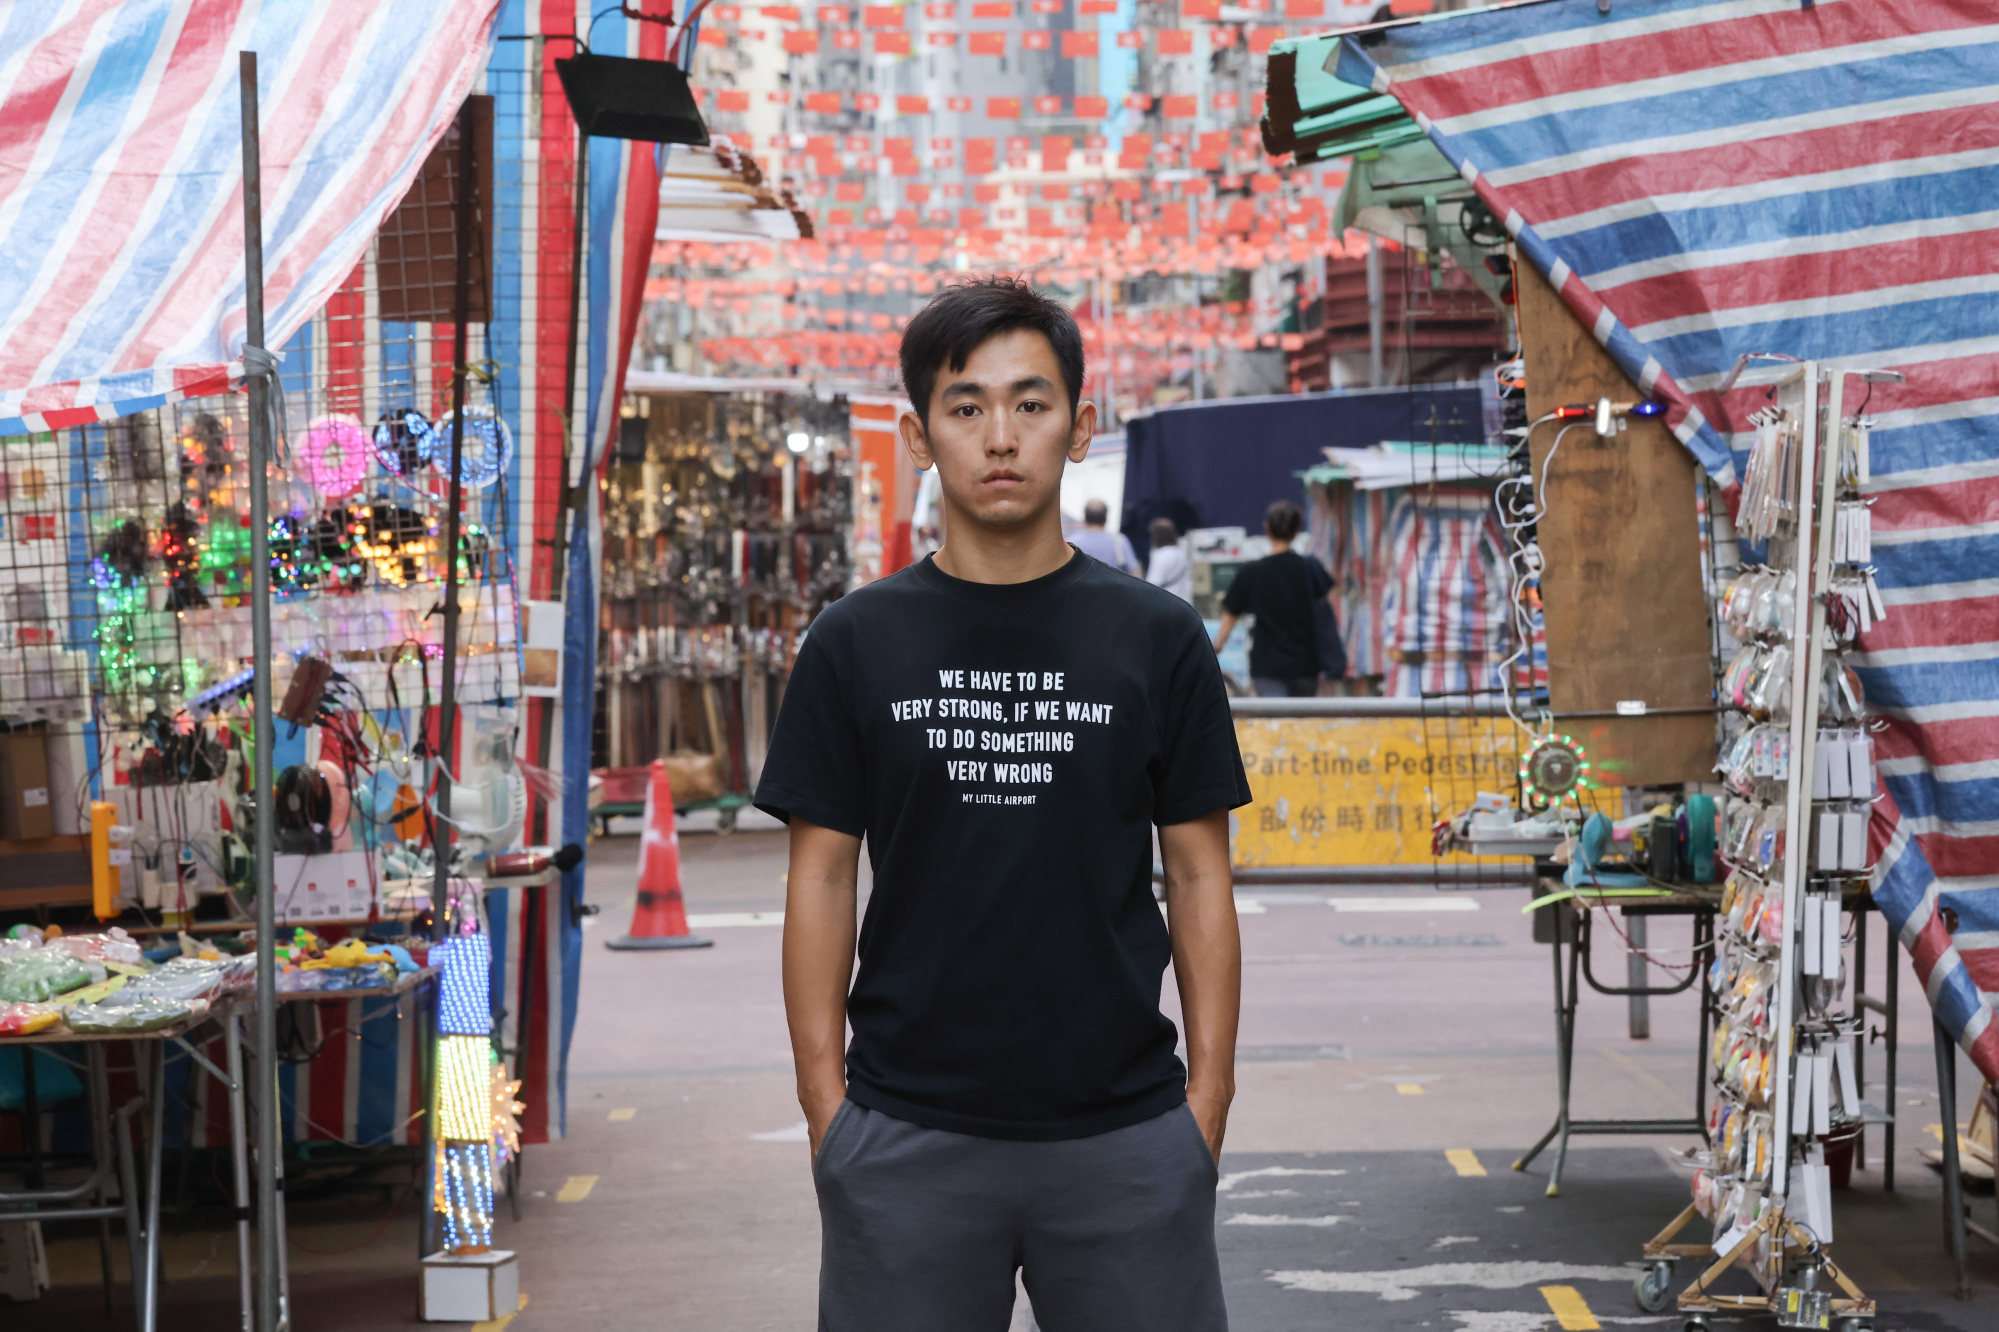 Andy Kan says prison brought many positive changes to his life. Photo: Jonathan Wong